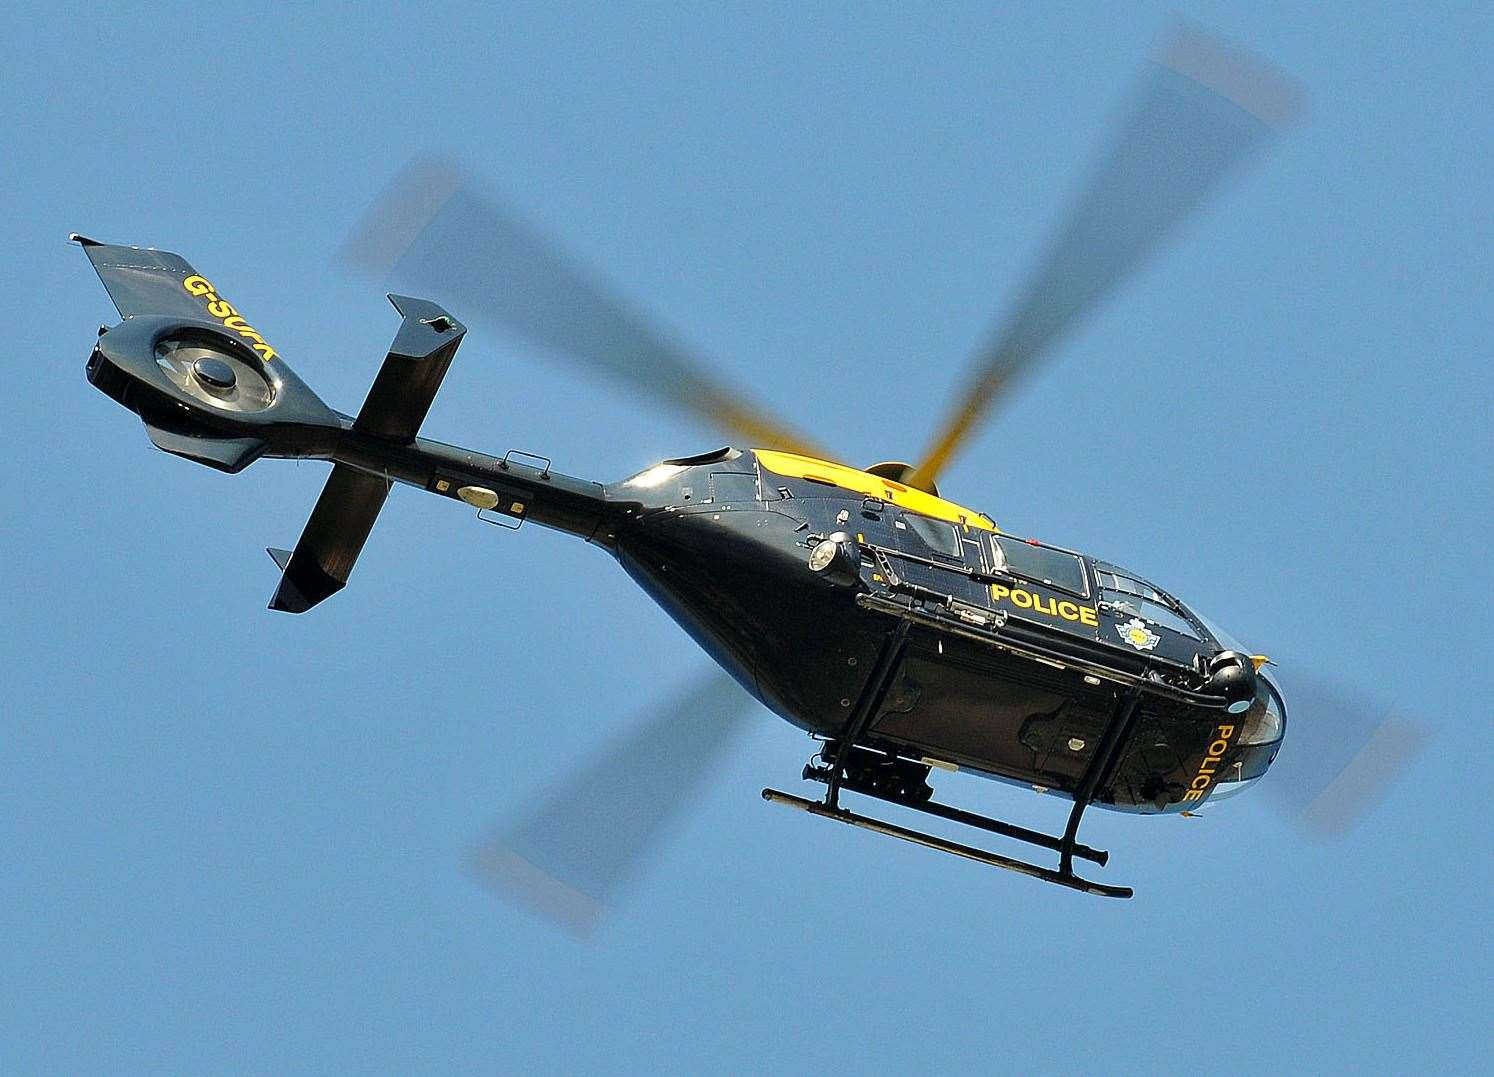 A police helicopter has been hovering above Chatham for hours